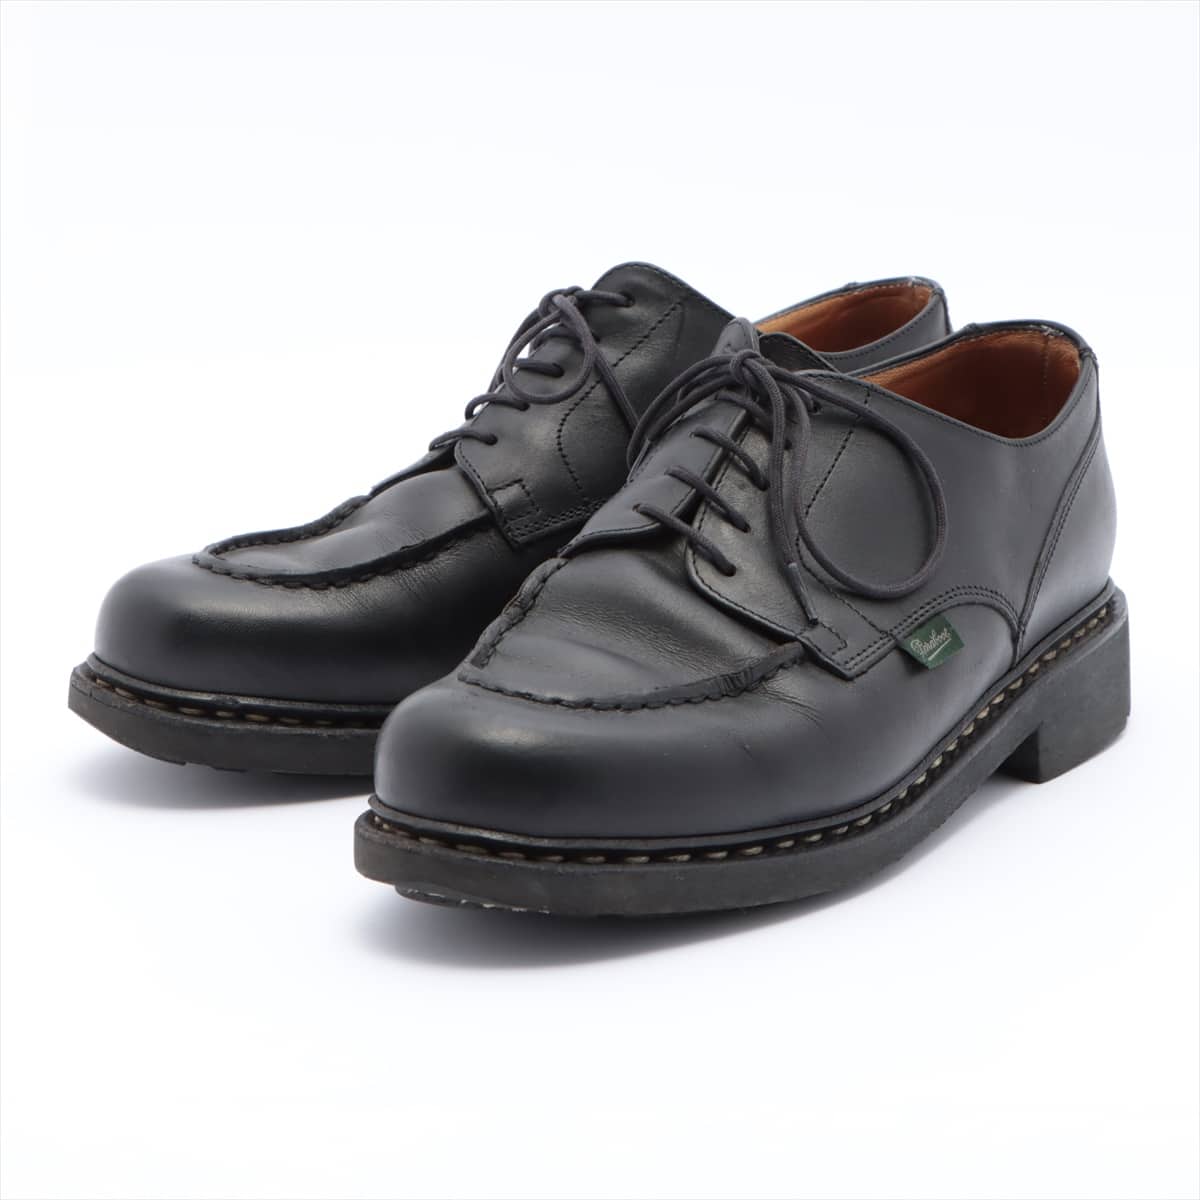 Paraboot Leather Leather shoes 7 Men's Black